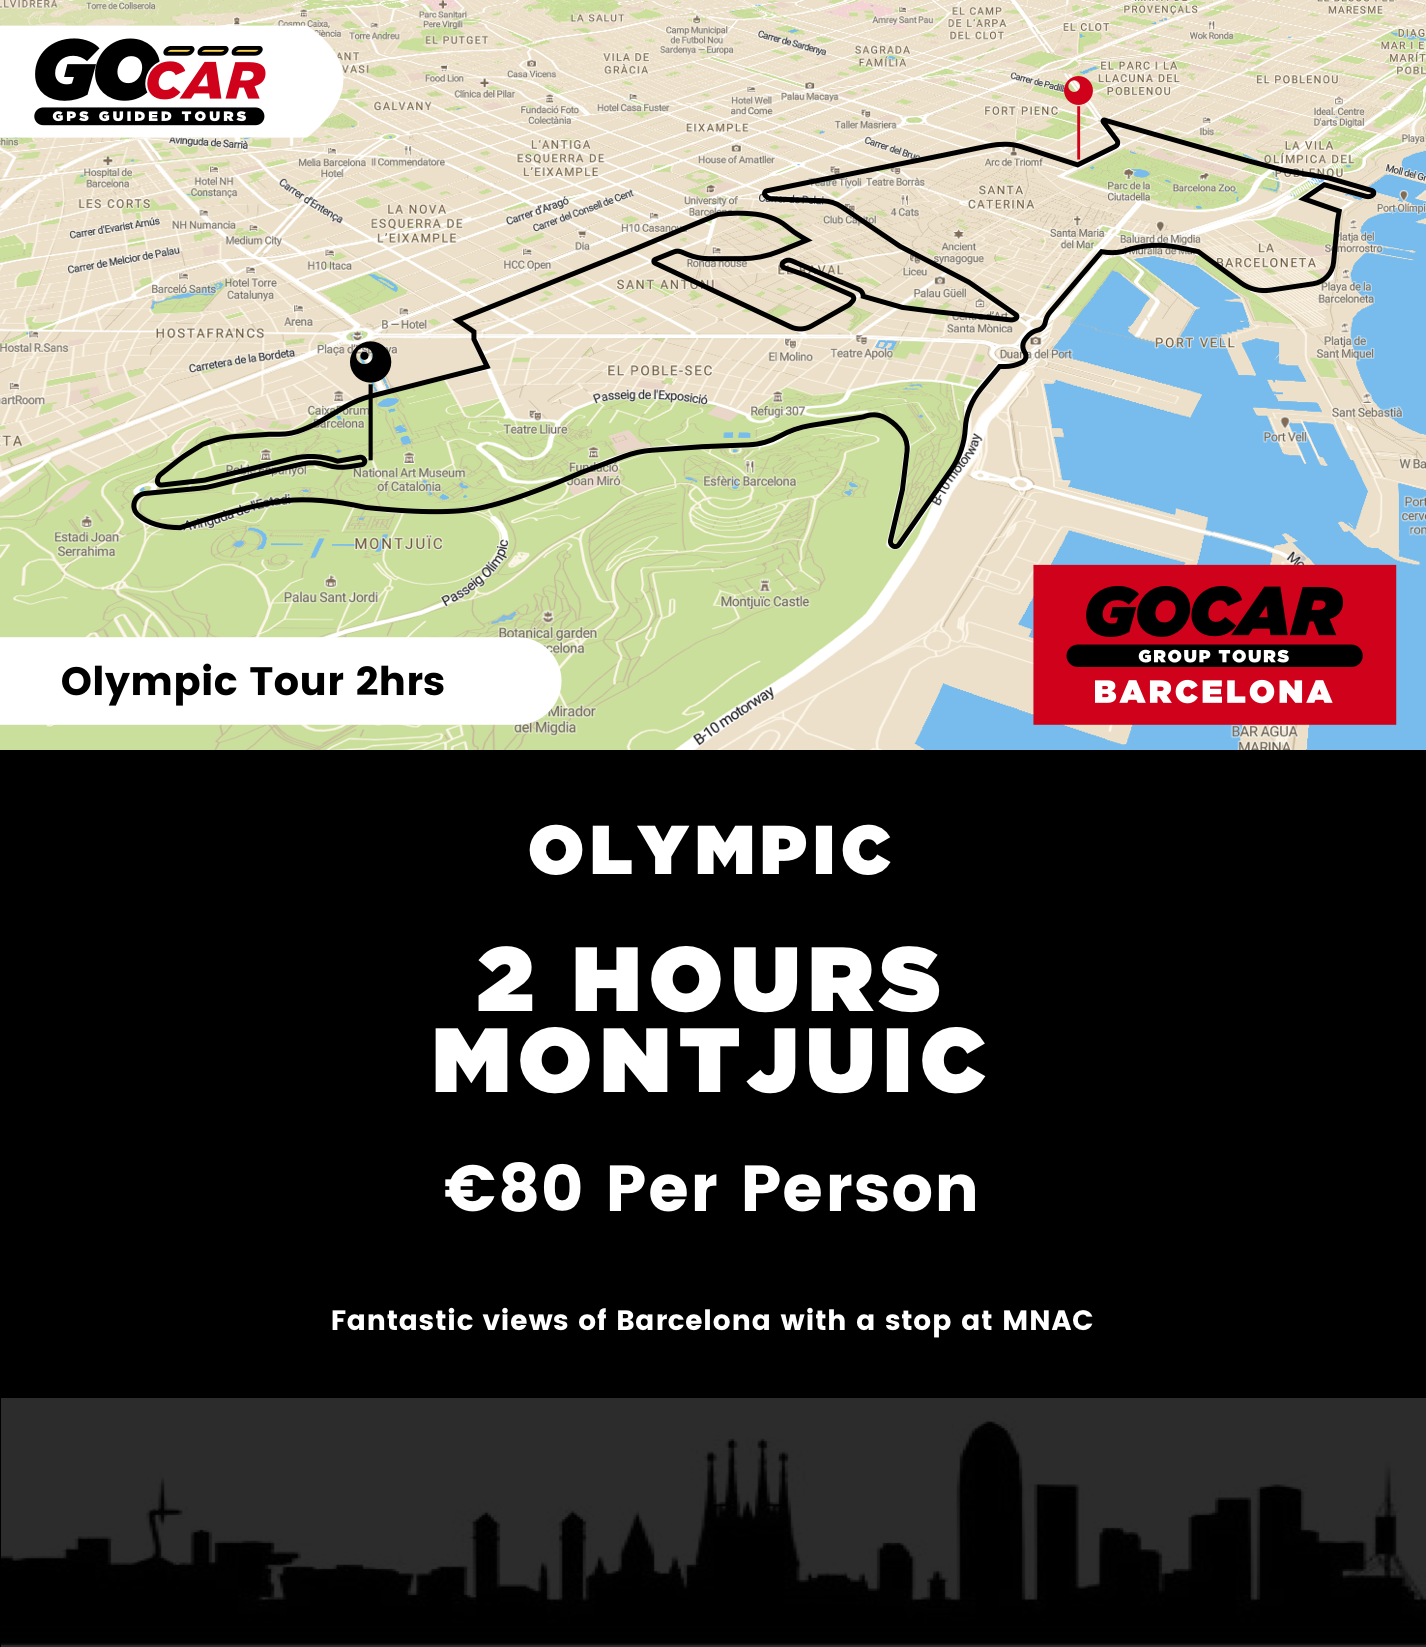 Barcelona Group Tours Olympic Montjuic